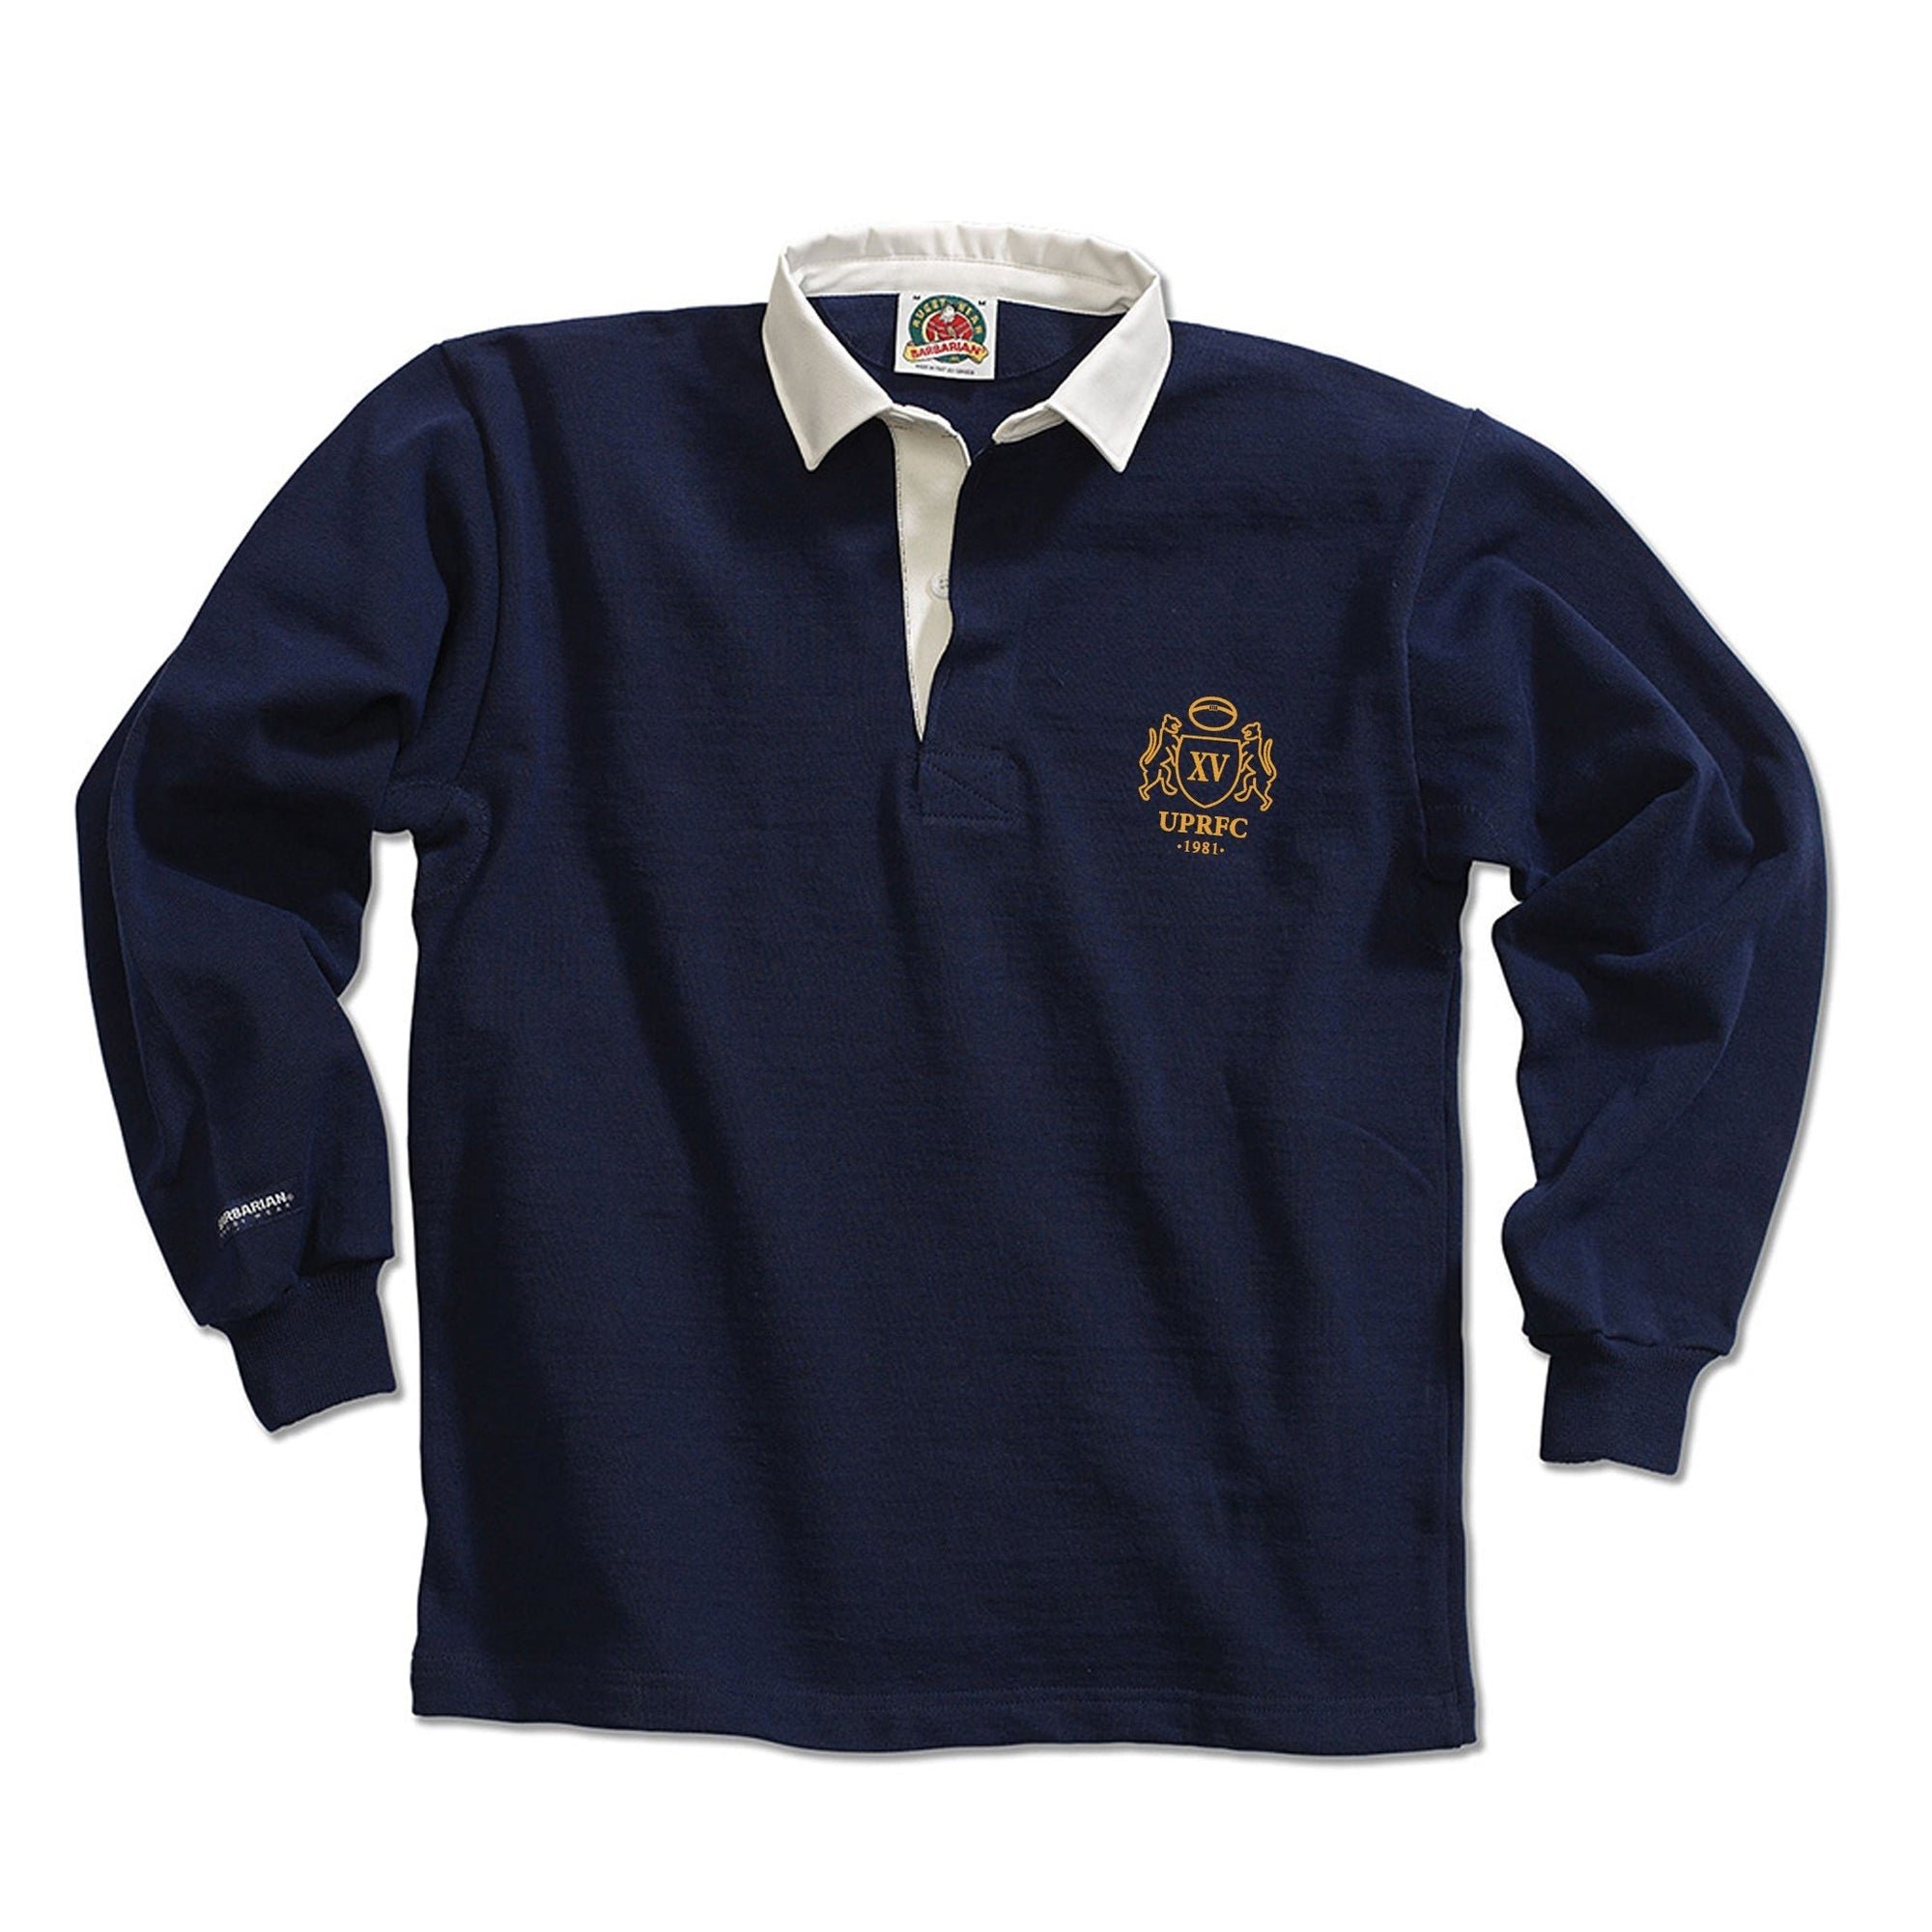 Rugby Imports UPitt RFC Traditional Jersey